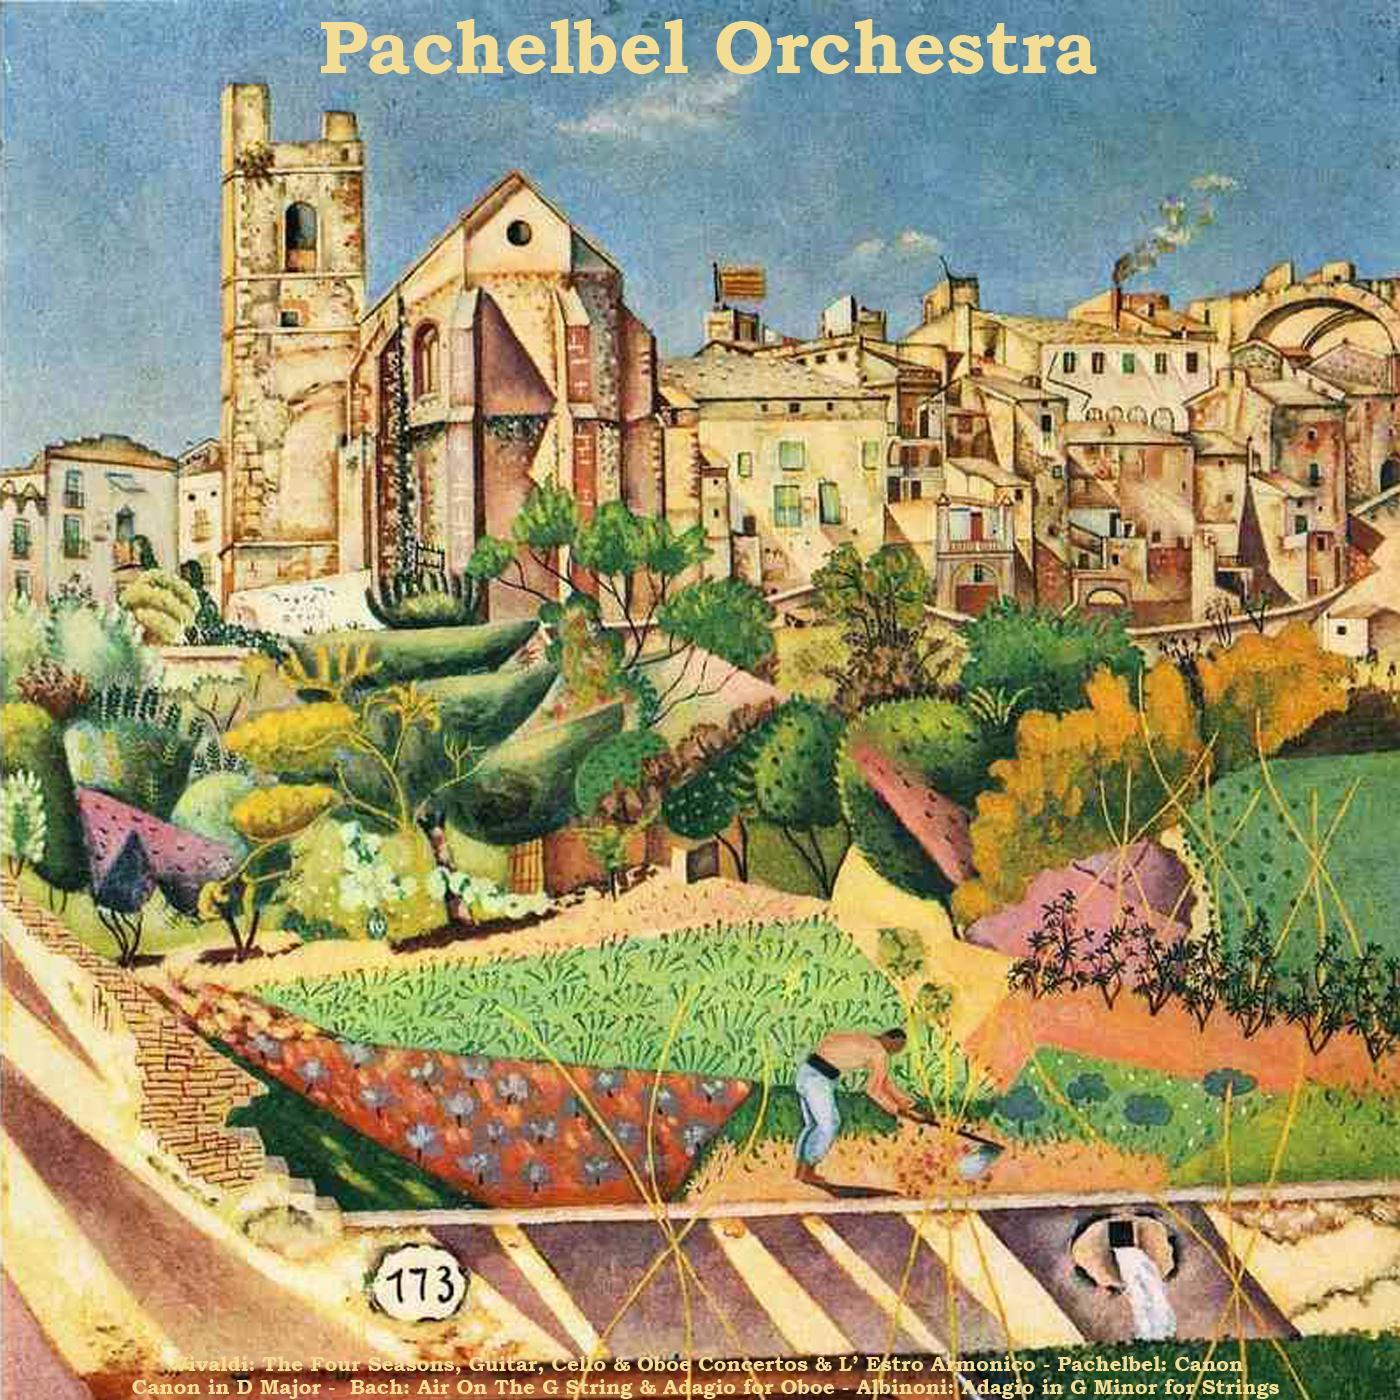 Pachelbel Orchestra - Concerto a 5 for Oboe and Strings in D Minor, Op. 9, No. 2: Adagio